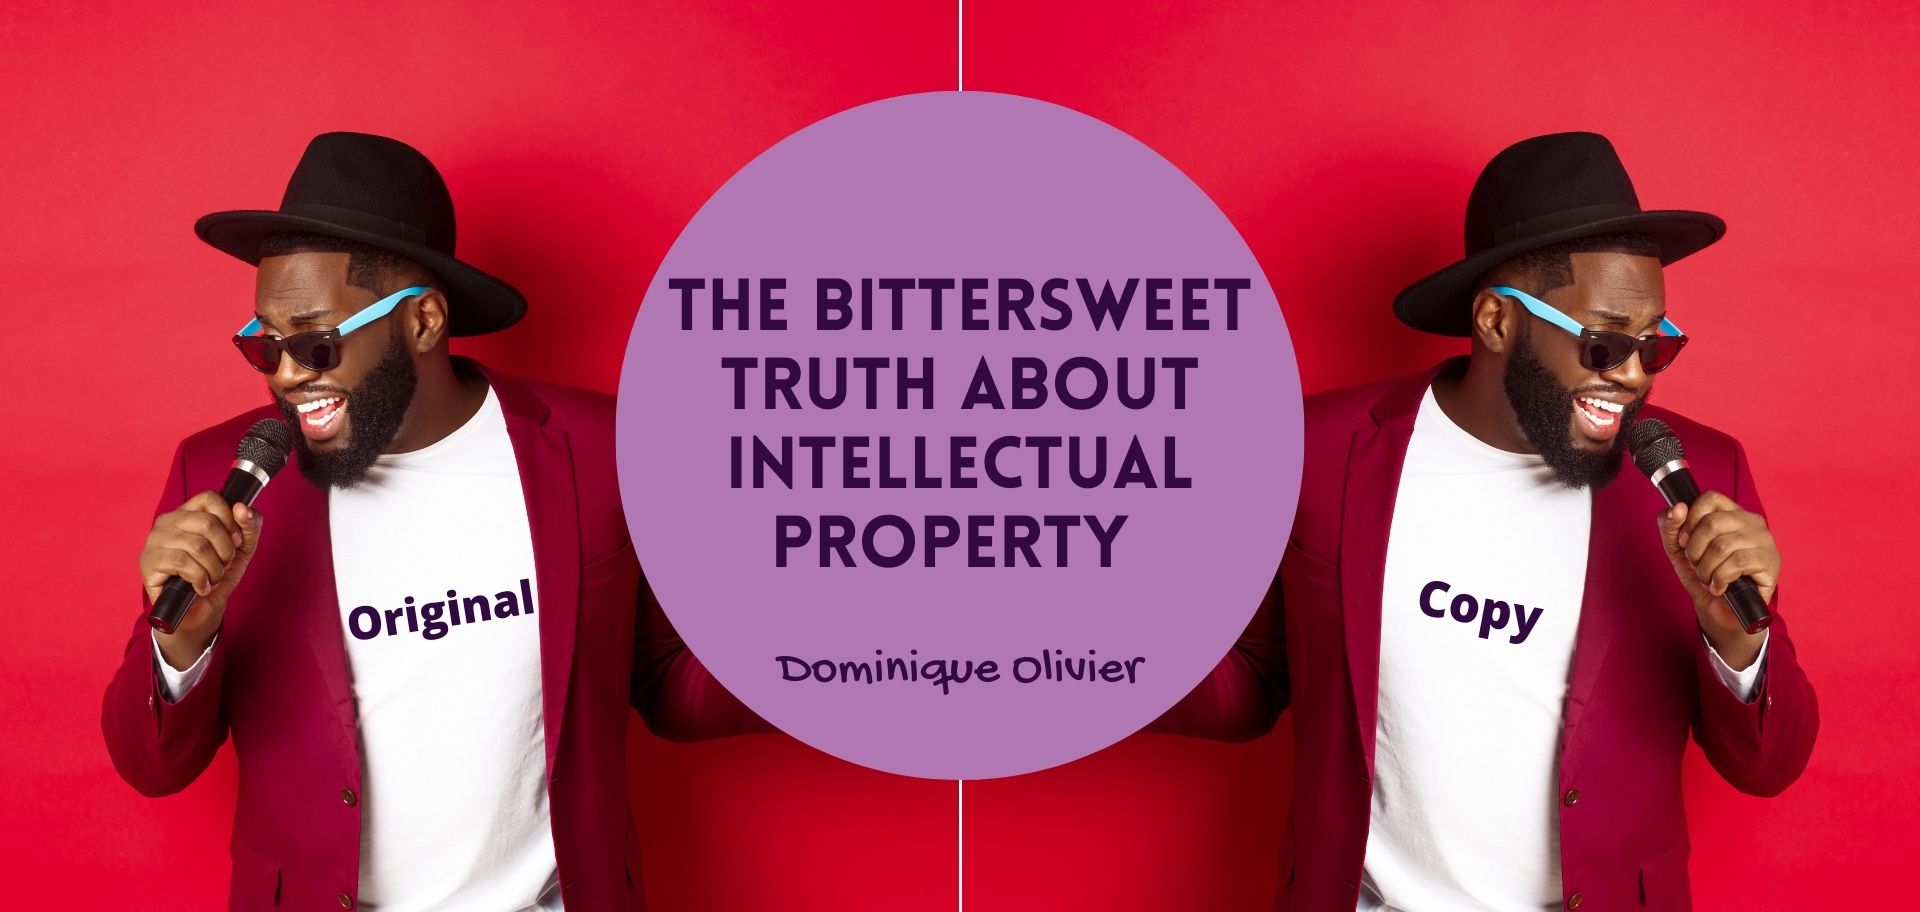 The bittersweet truth about intellectual property